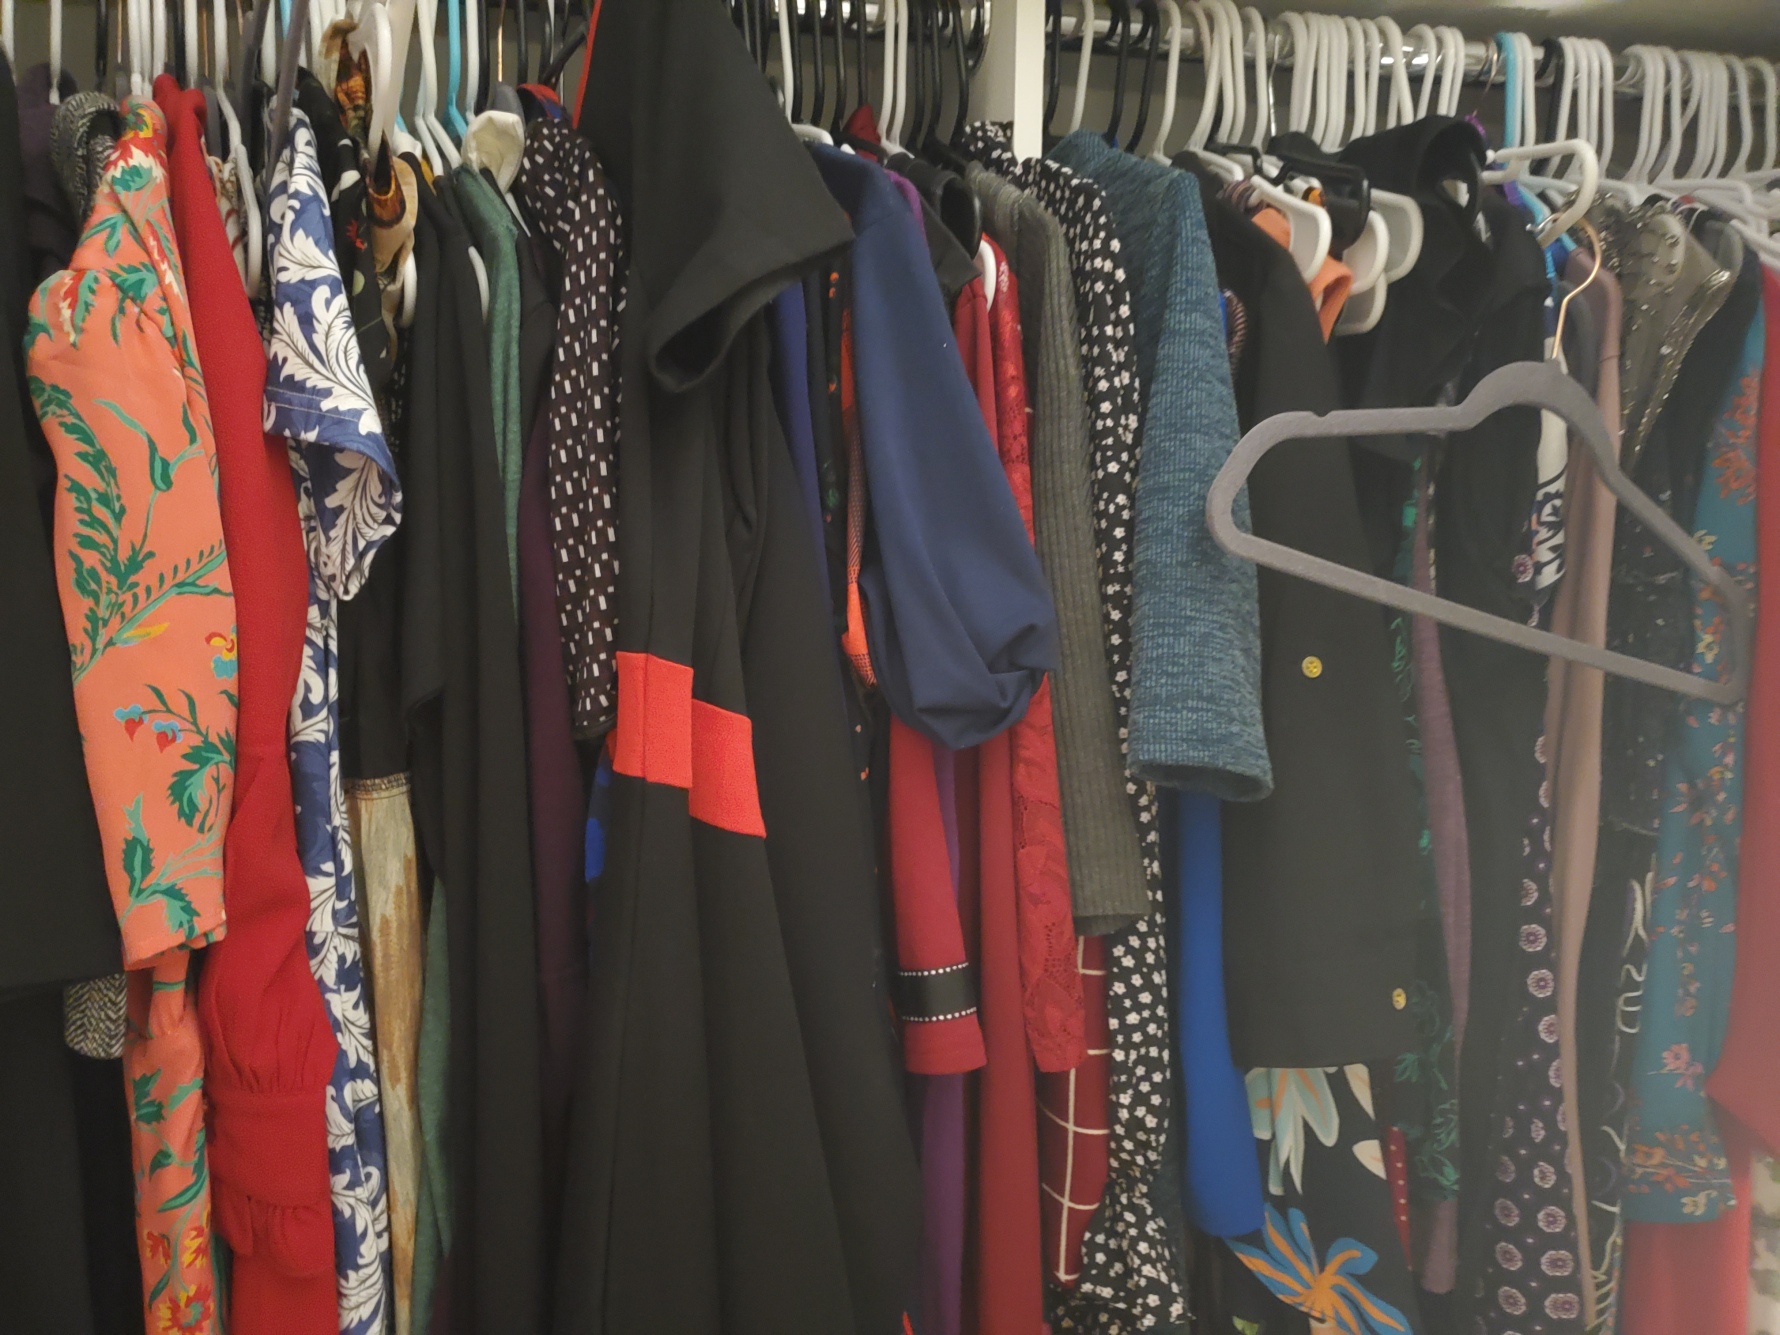 The silly need for more than 27 dresses in my NYC closet – psychologistmimi